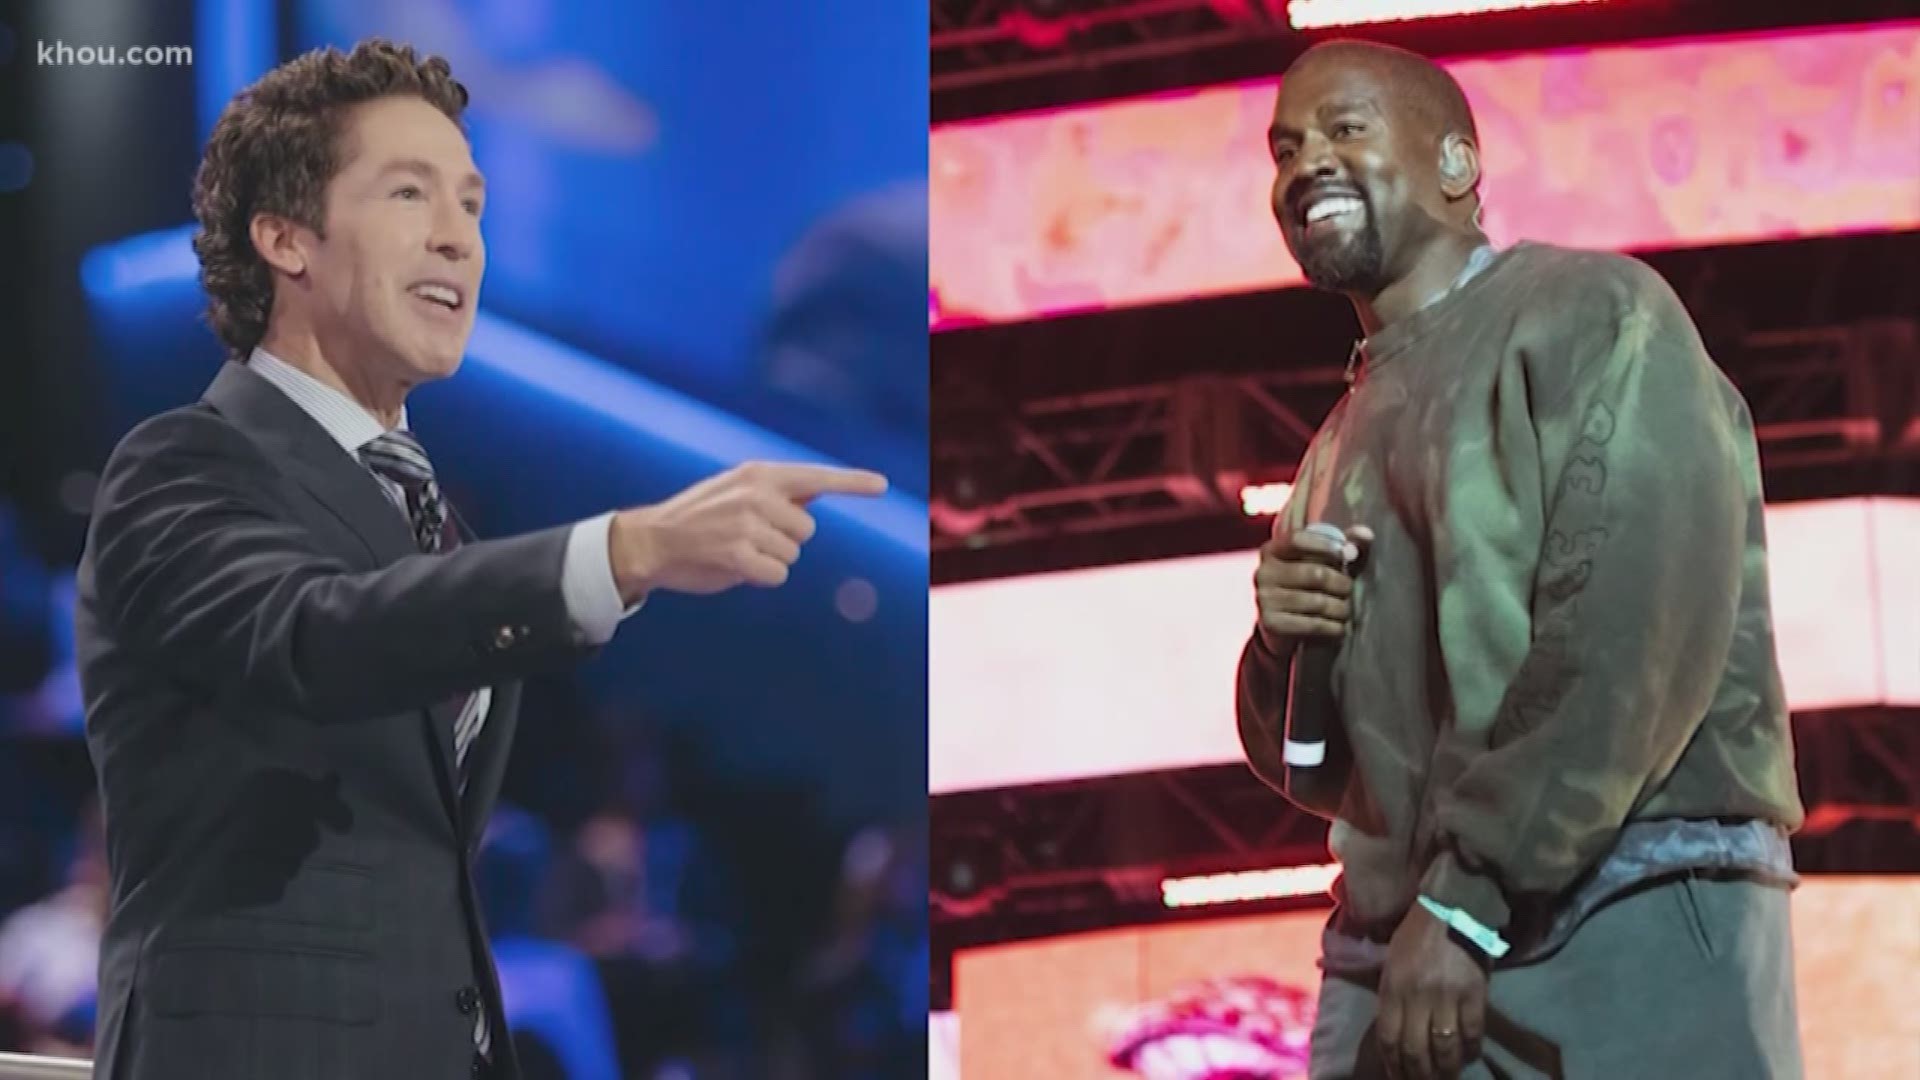 Many people are singing the praises of Kanye West’s pending visit to Lakewood Church.